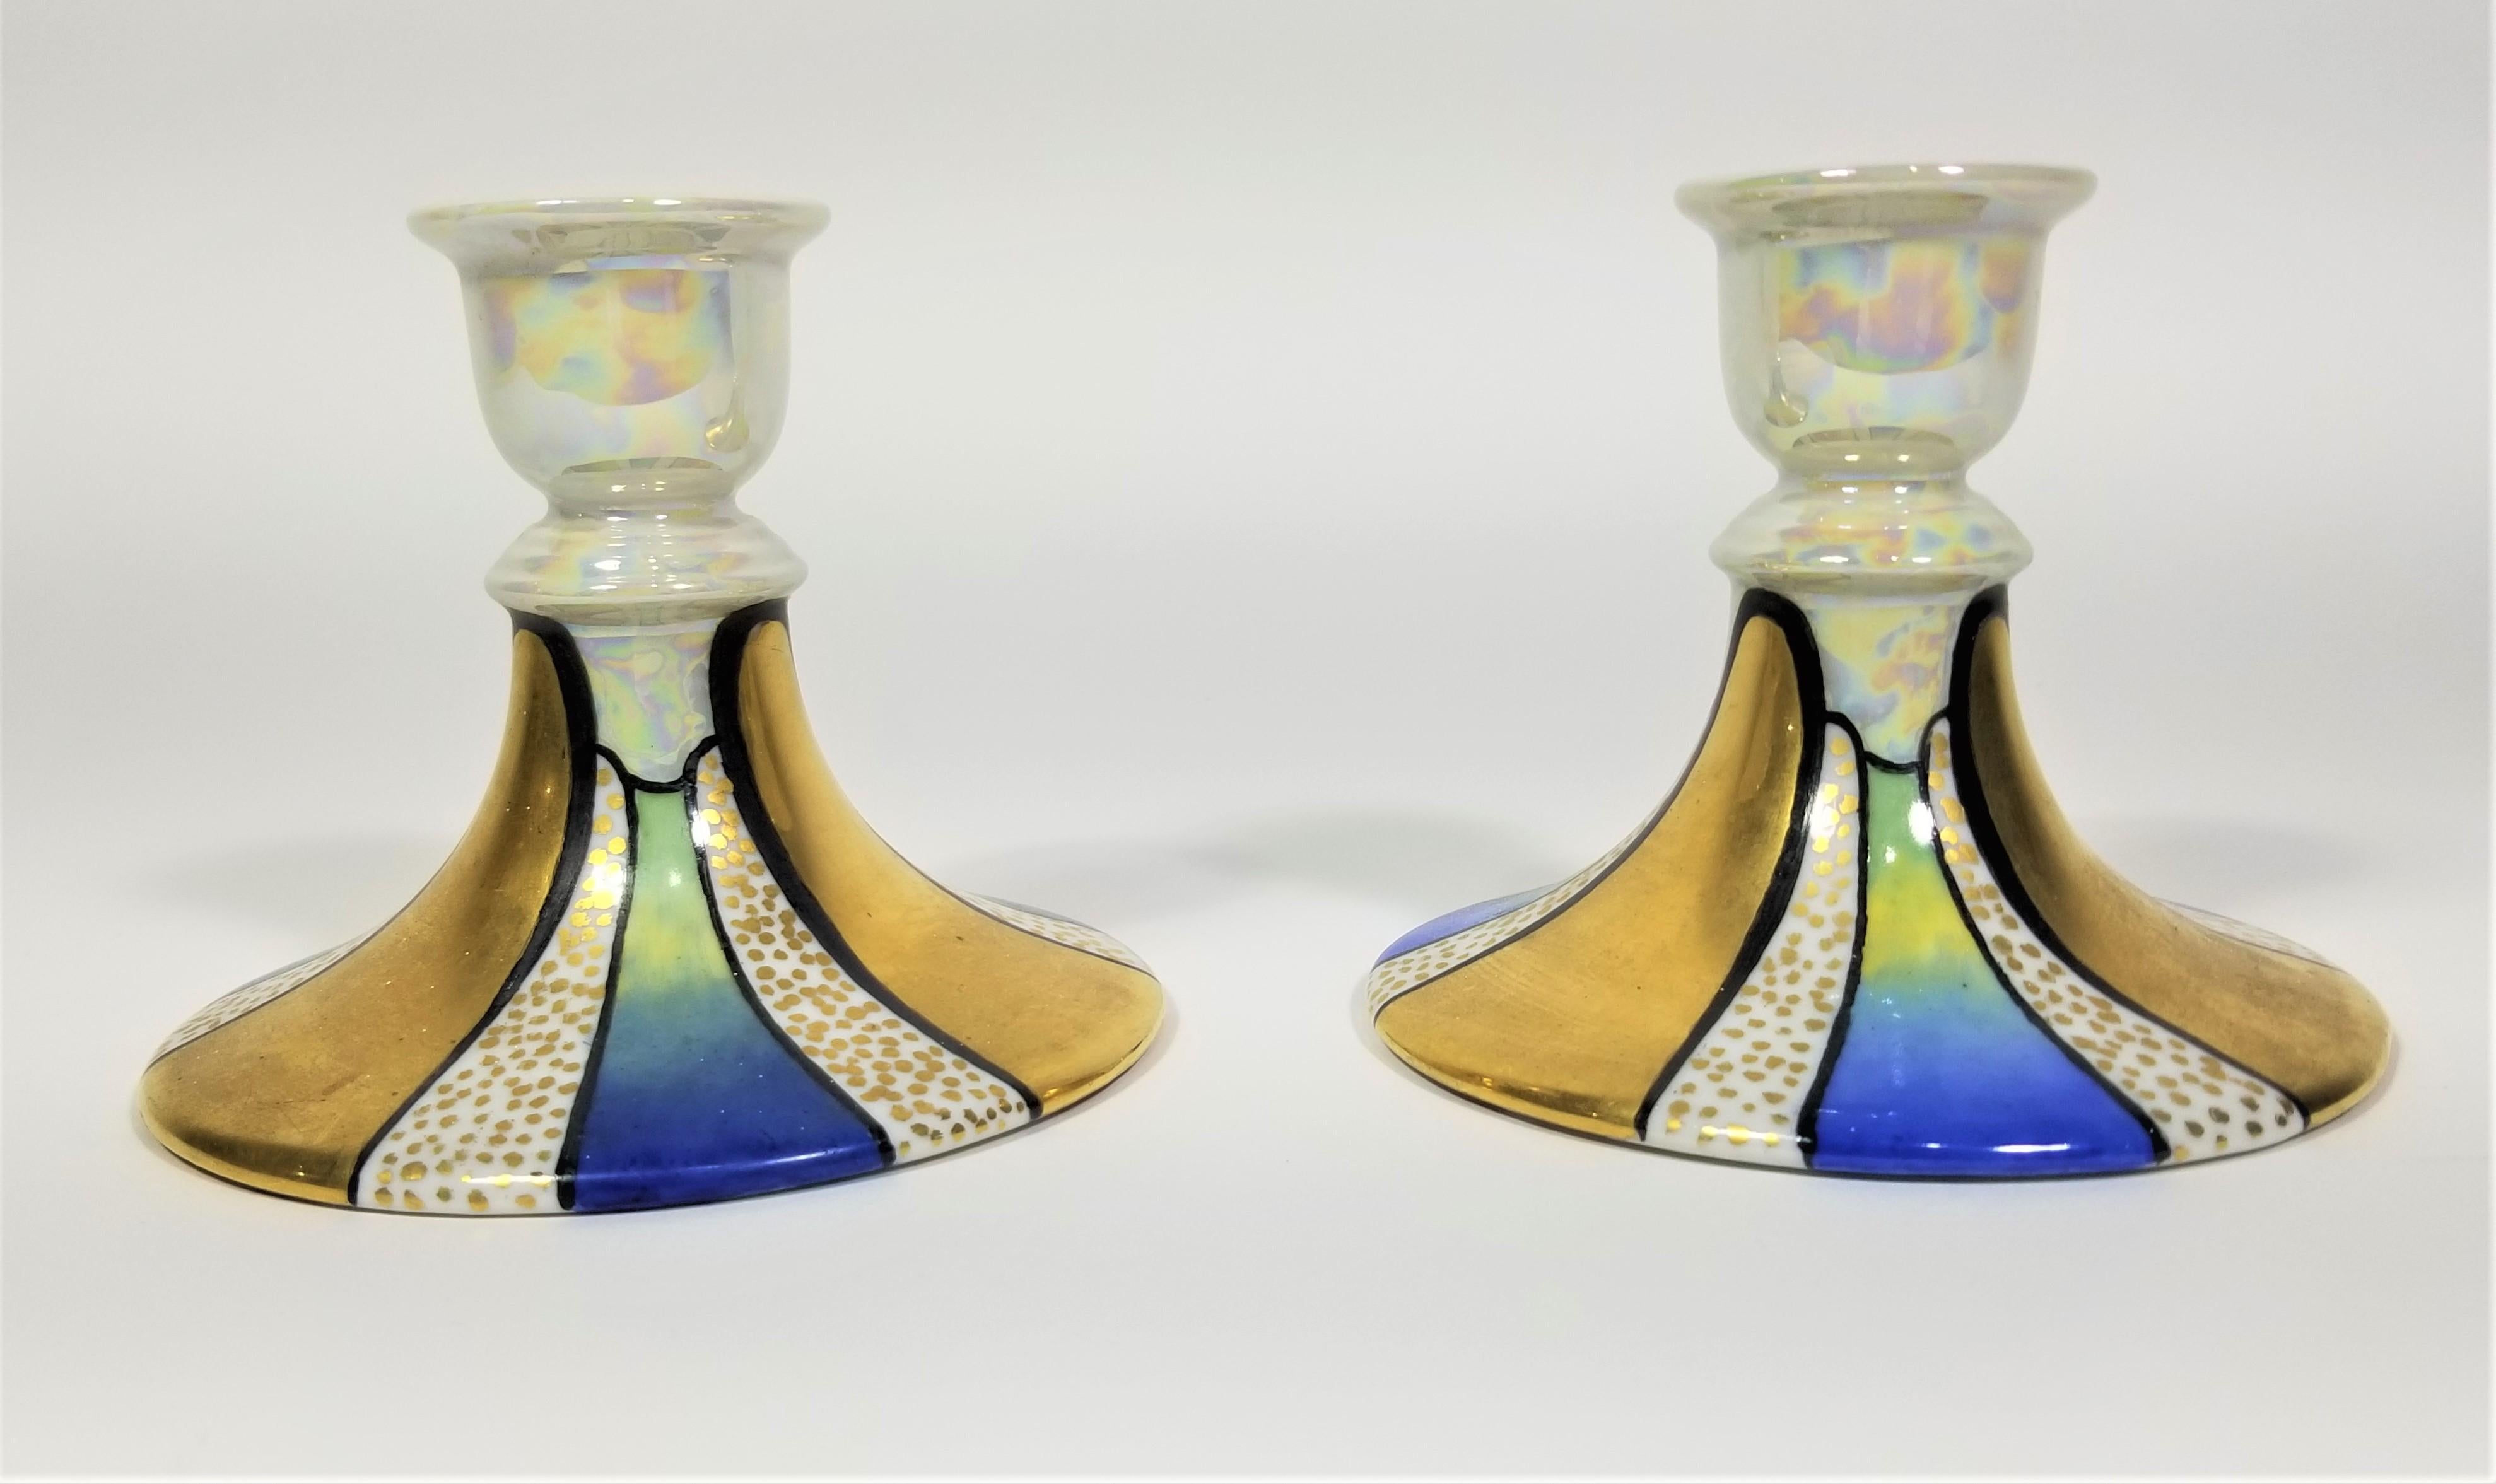 Hand-Painted Art Nouveau Porcelain Candle Holders, German Bavaria Artist Signed Dated 1934 For Sale